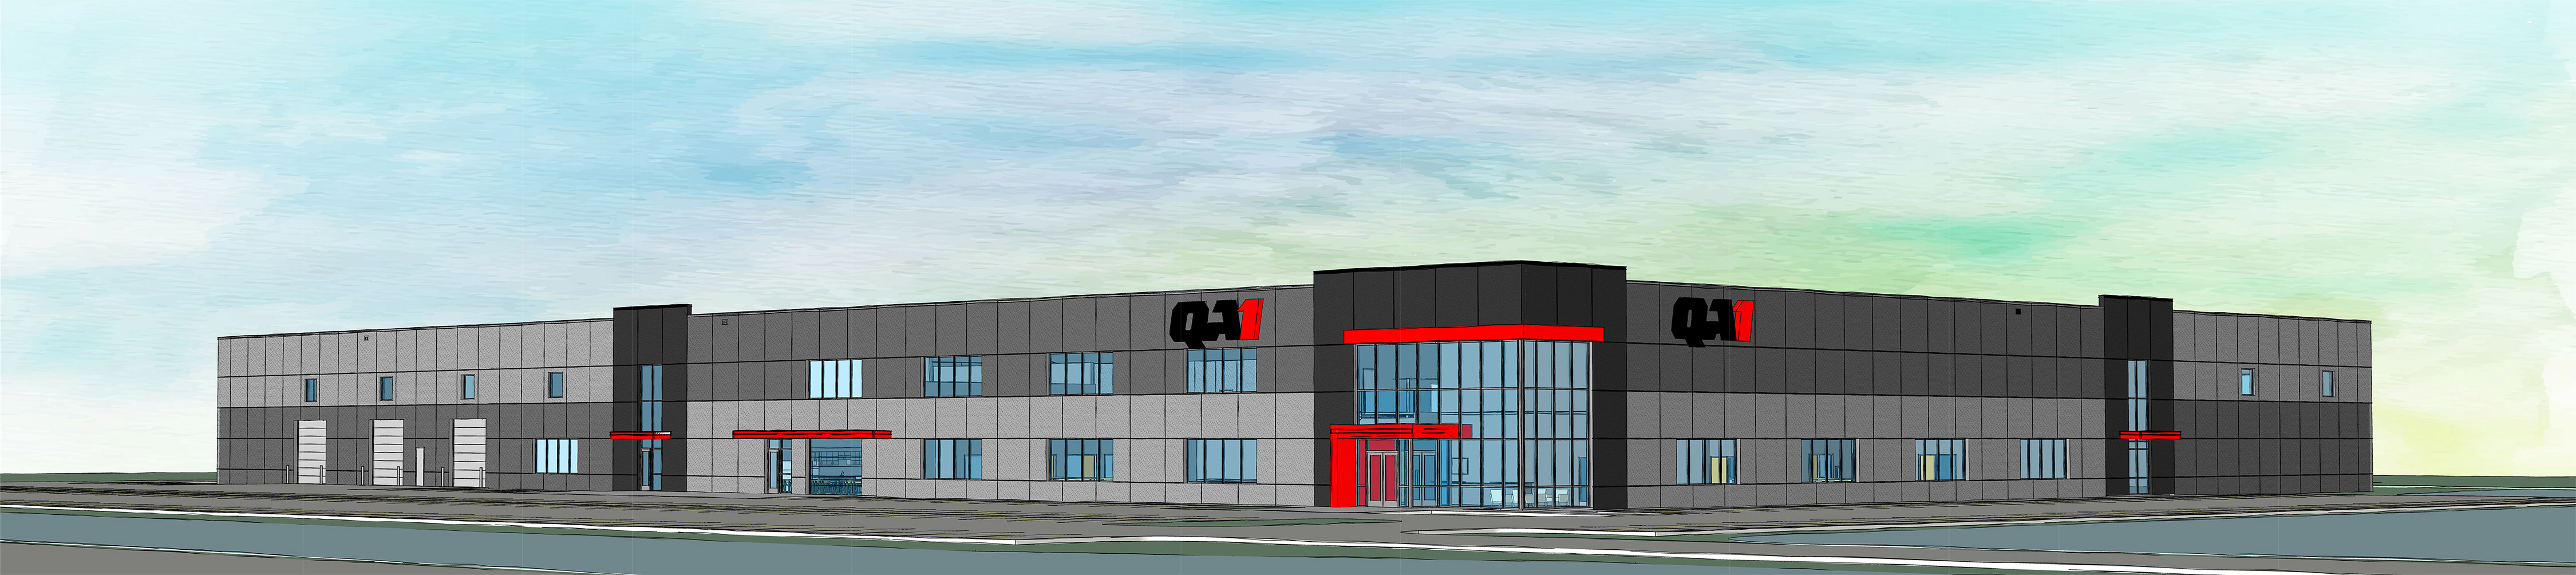 A rendering of what the new QA1 building may look like when complete